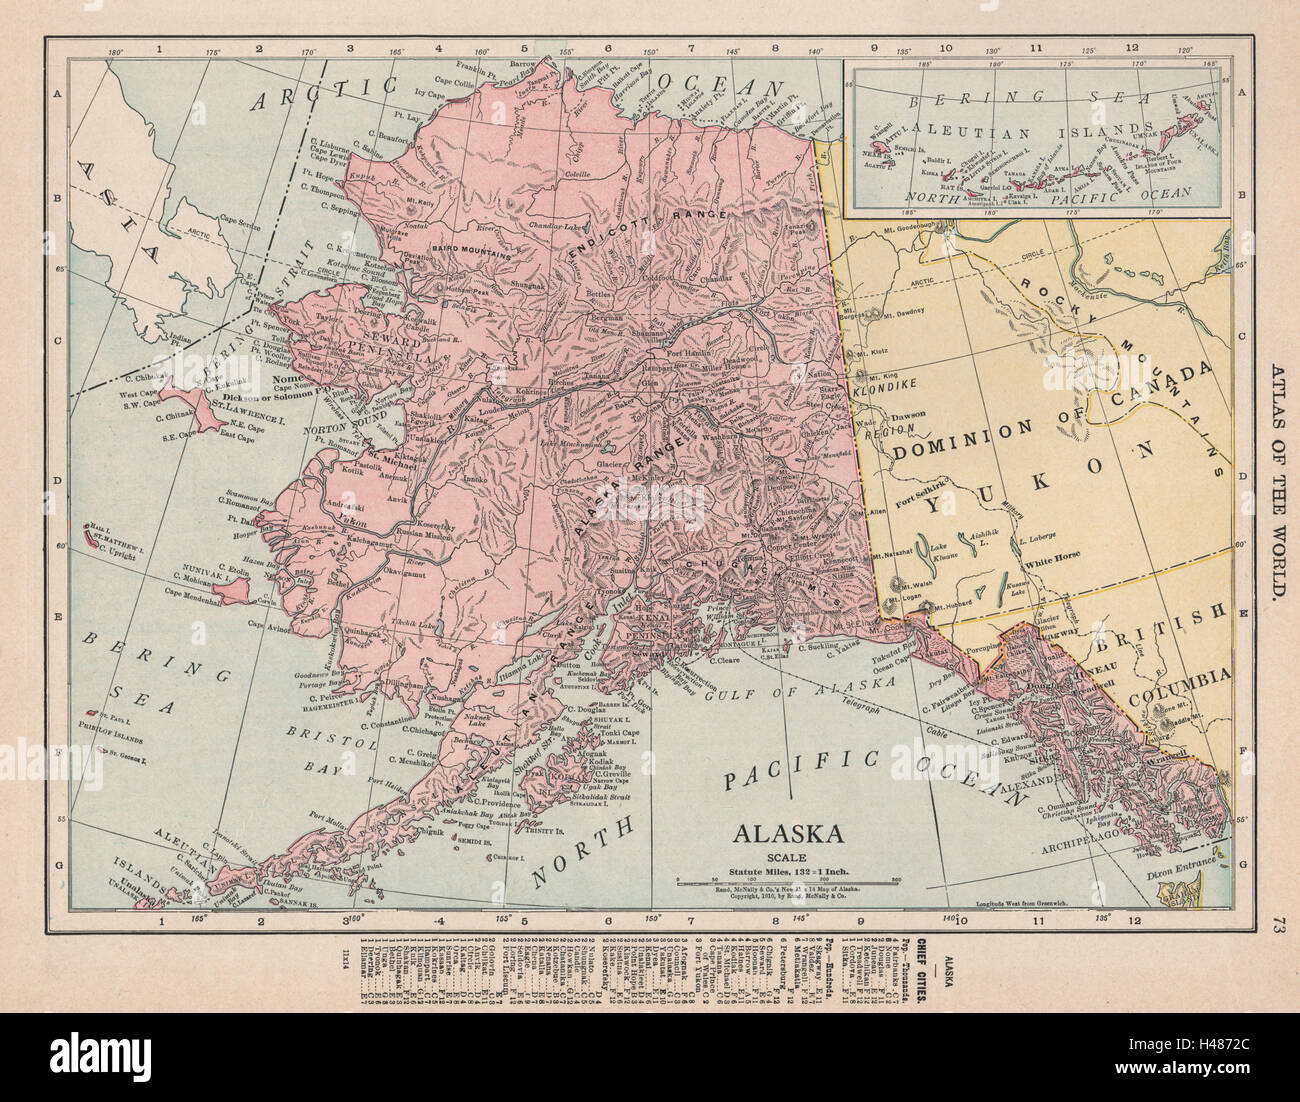 Alaska state map showing boroughs. Pre-Anchorage. RAND MCNALLY 1912 old Stock Photo